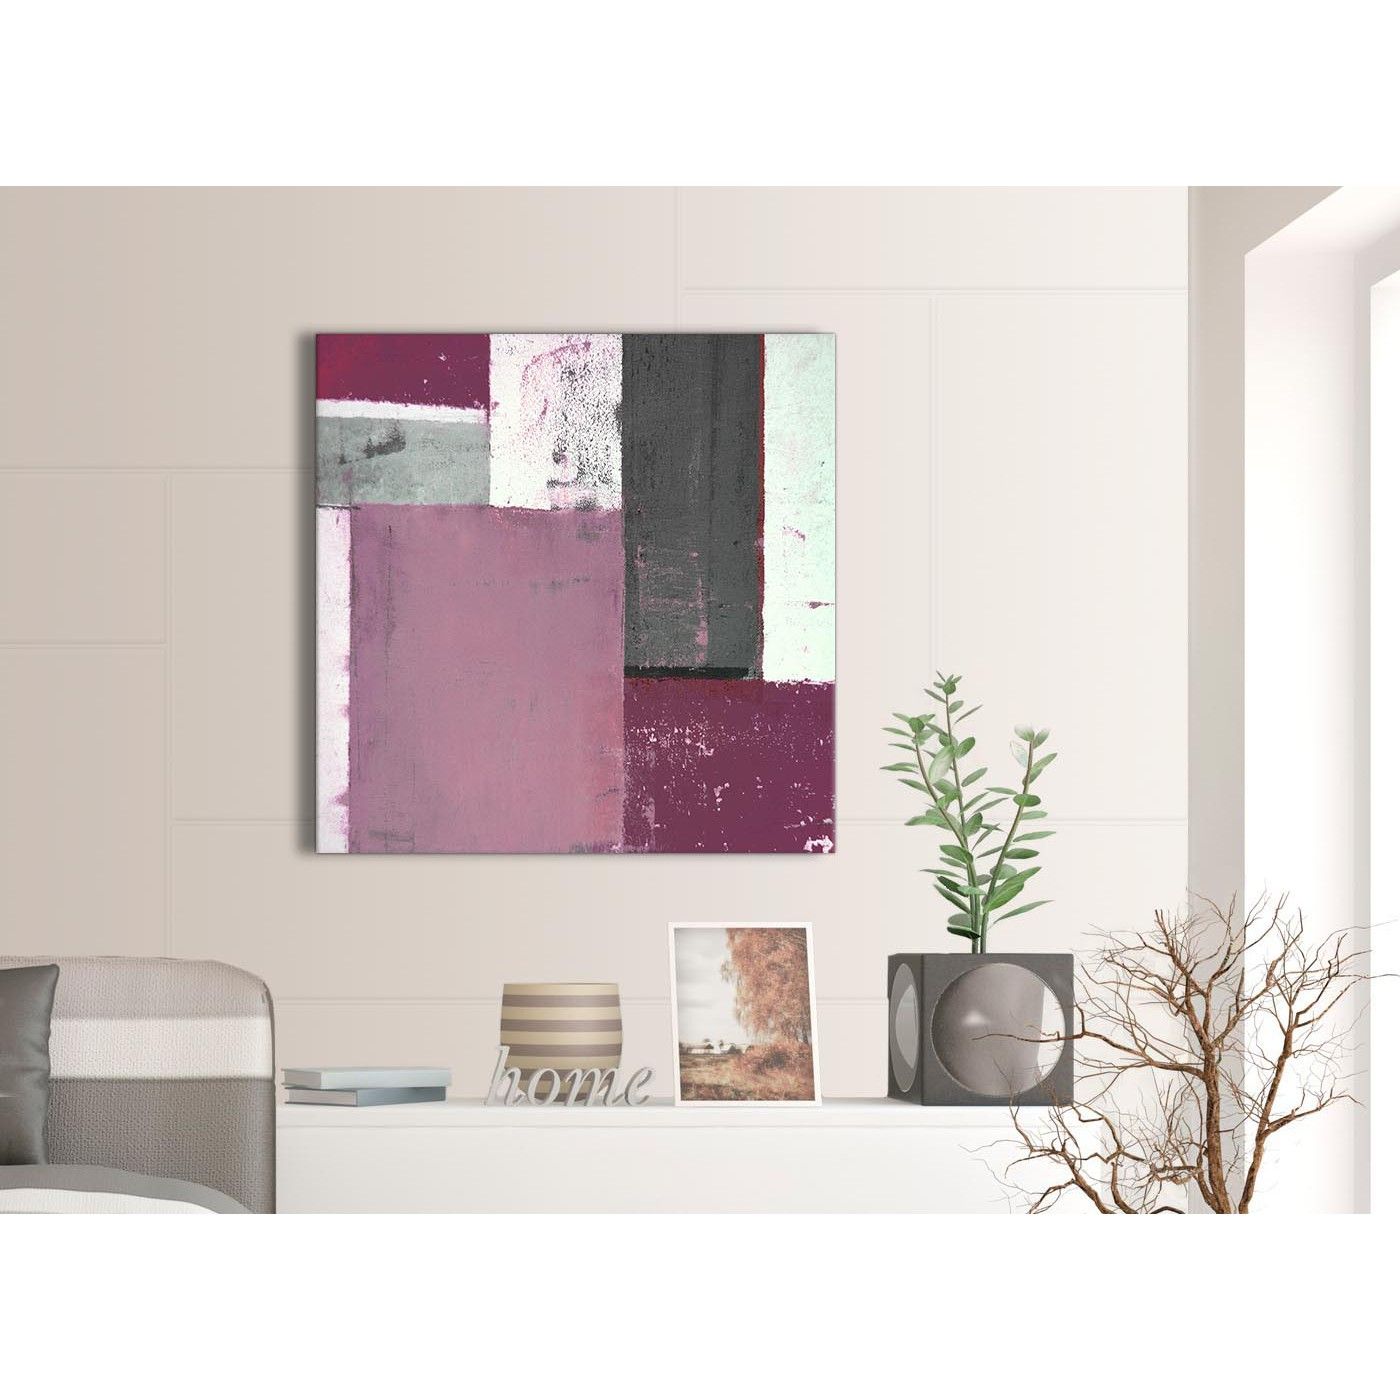 Plum Grey Abstract Painting Canvas Wall Art Picture – Modern 79cm Inside Most Recently Released Square Canvas Wall Art (View 8 of 20)